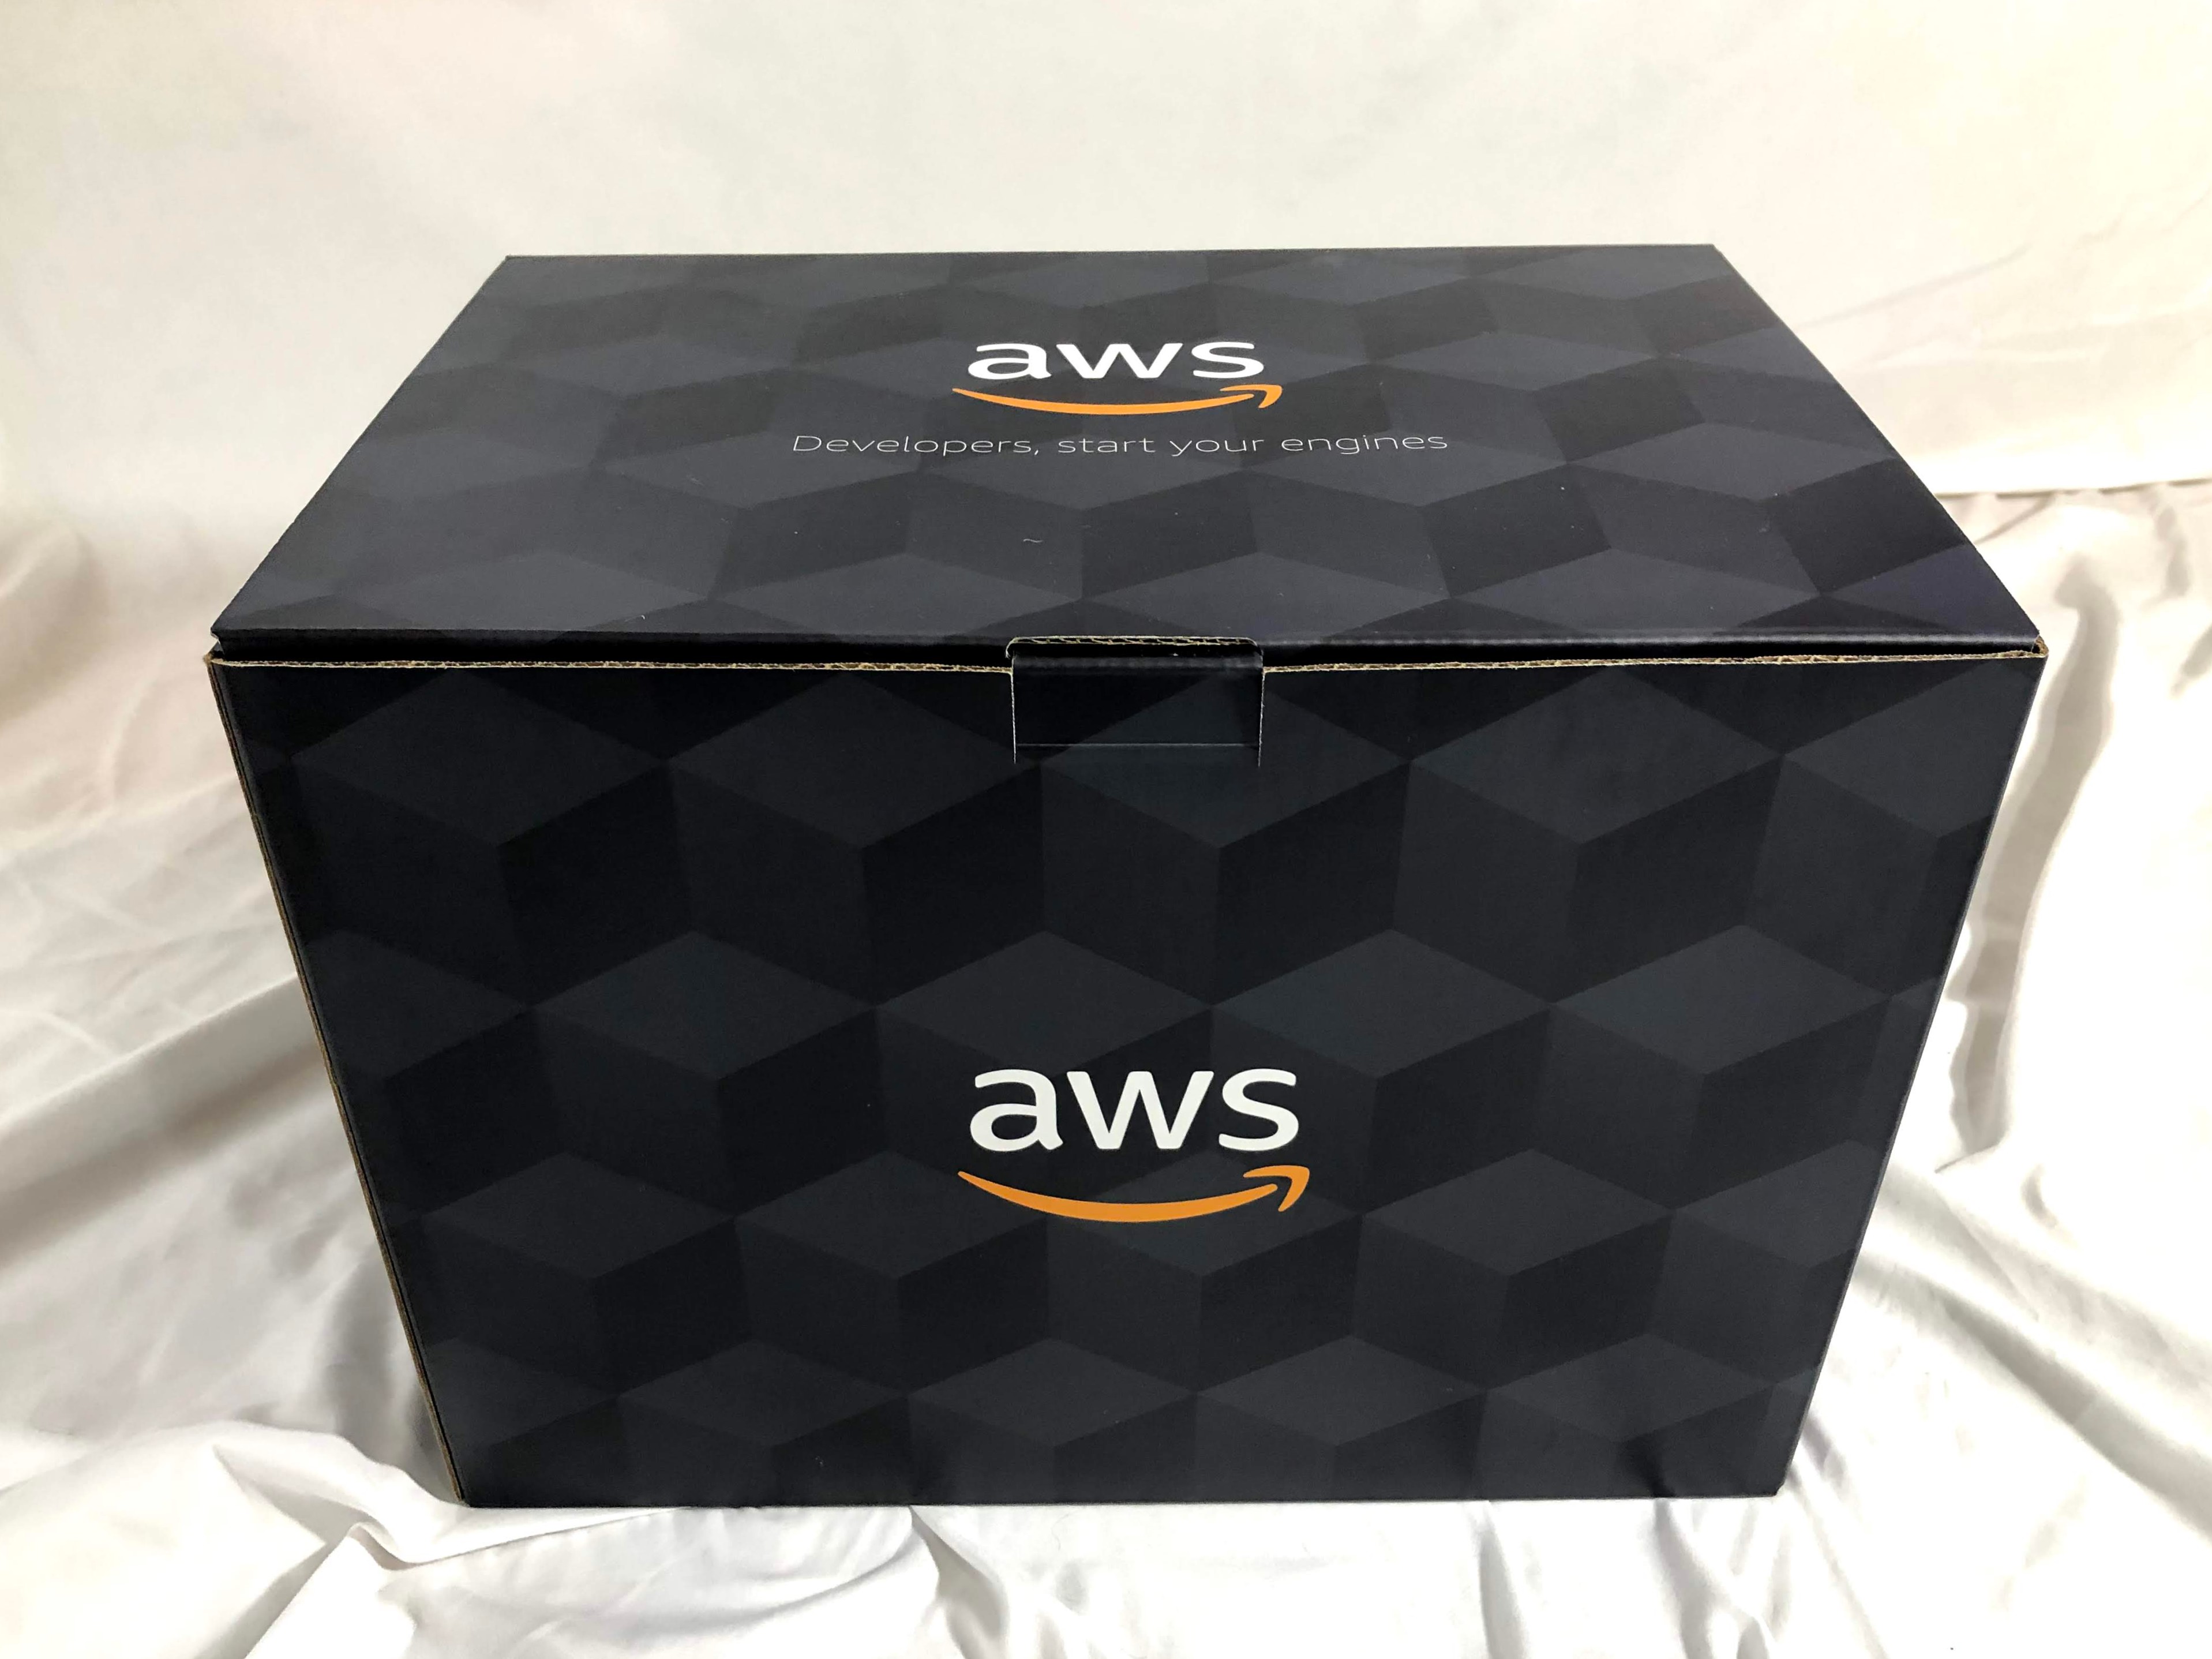 Unboxing the AWS Deep Racer